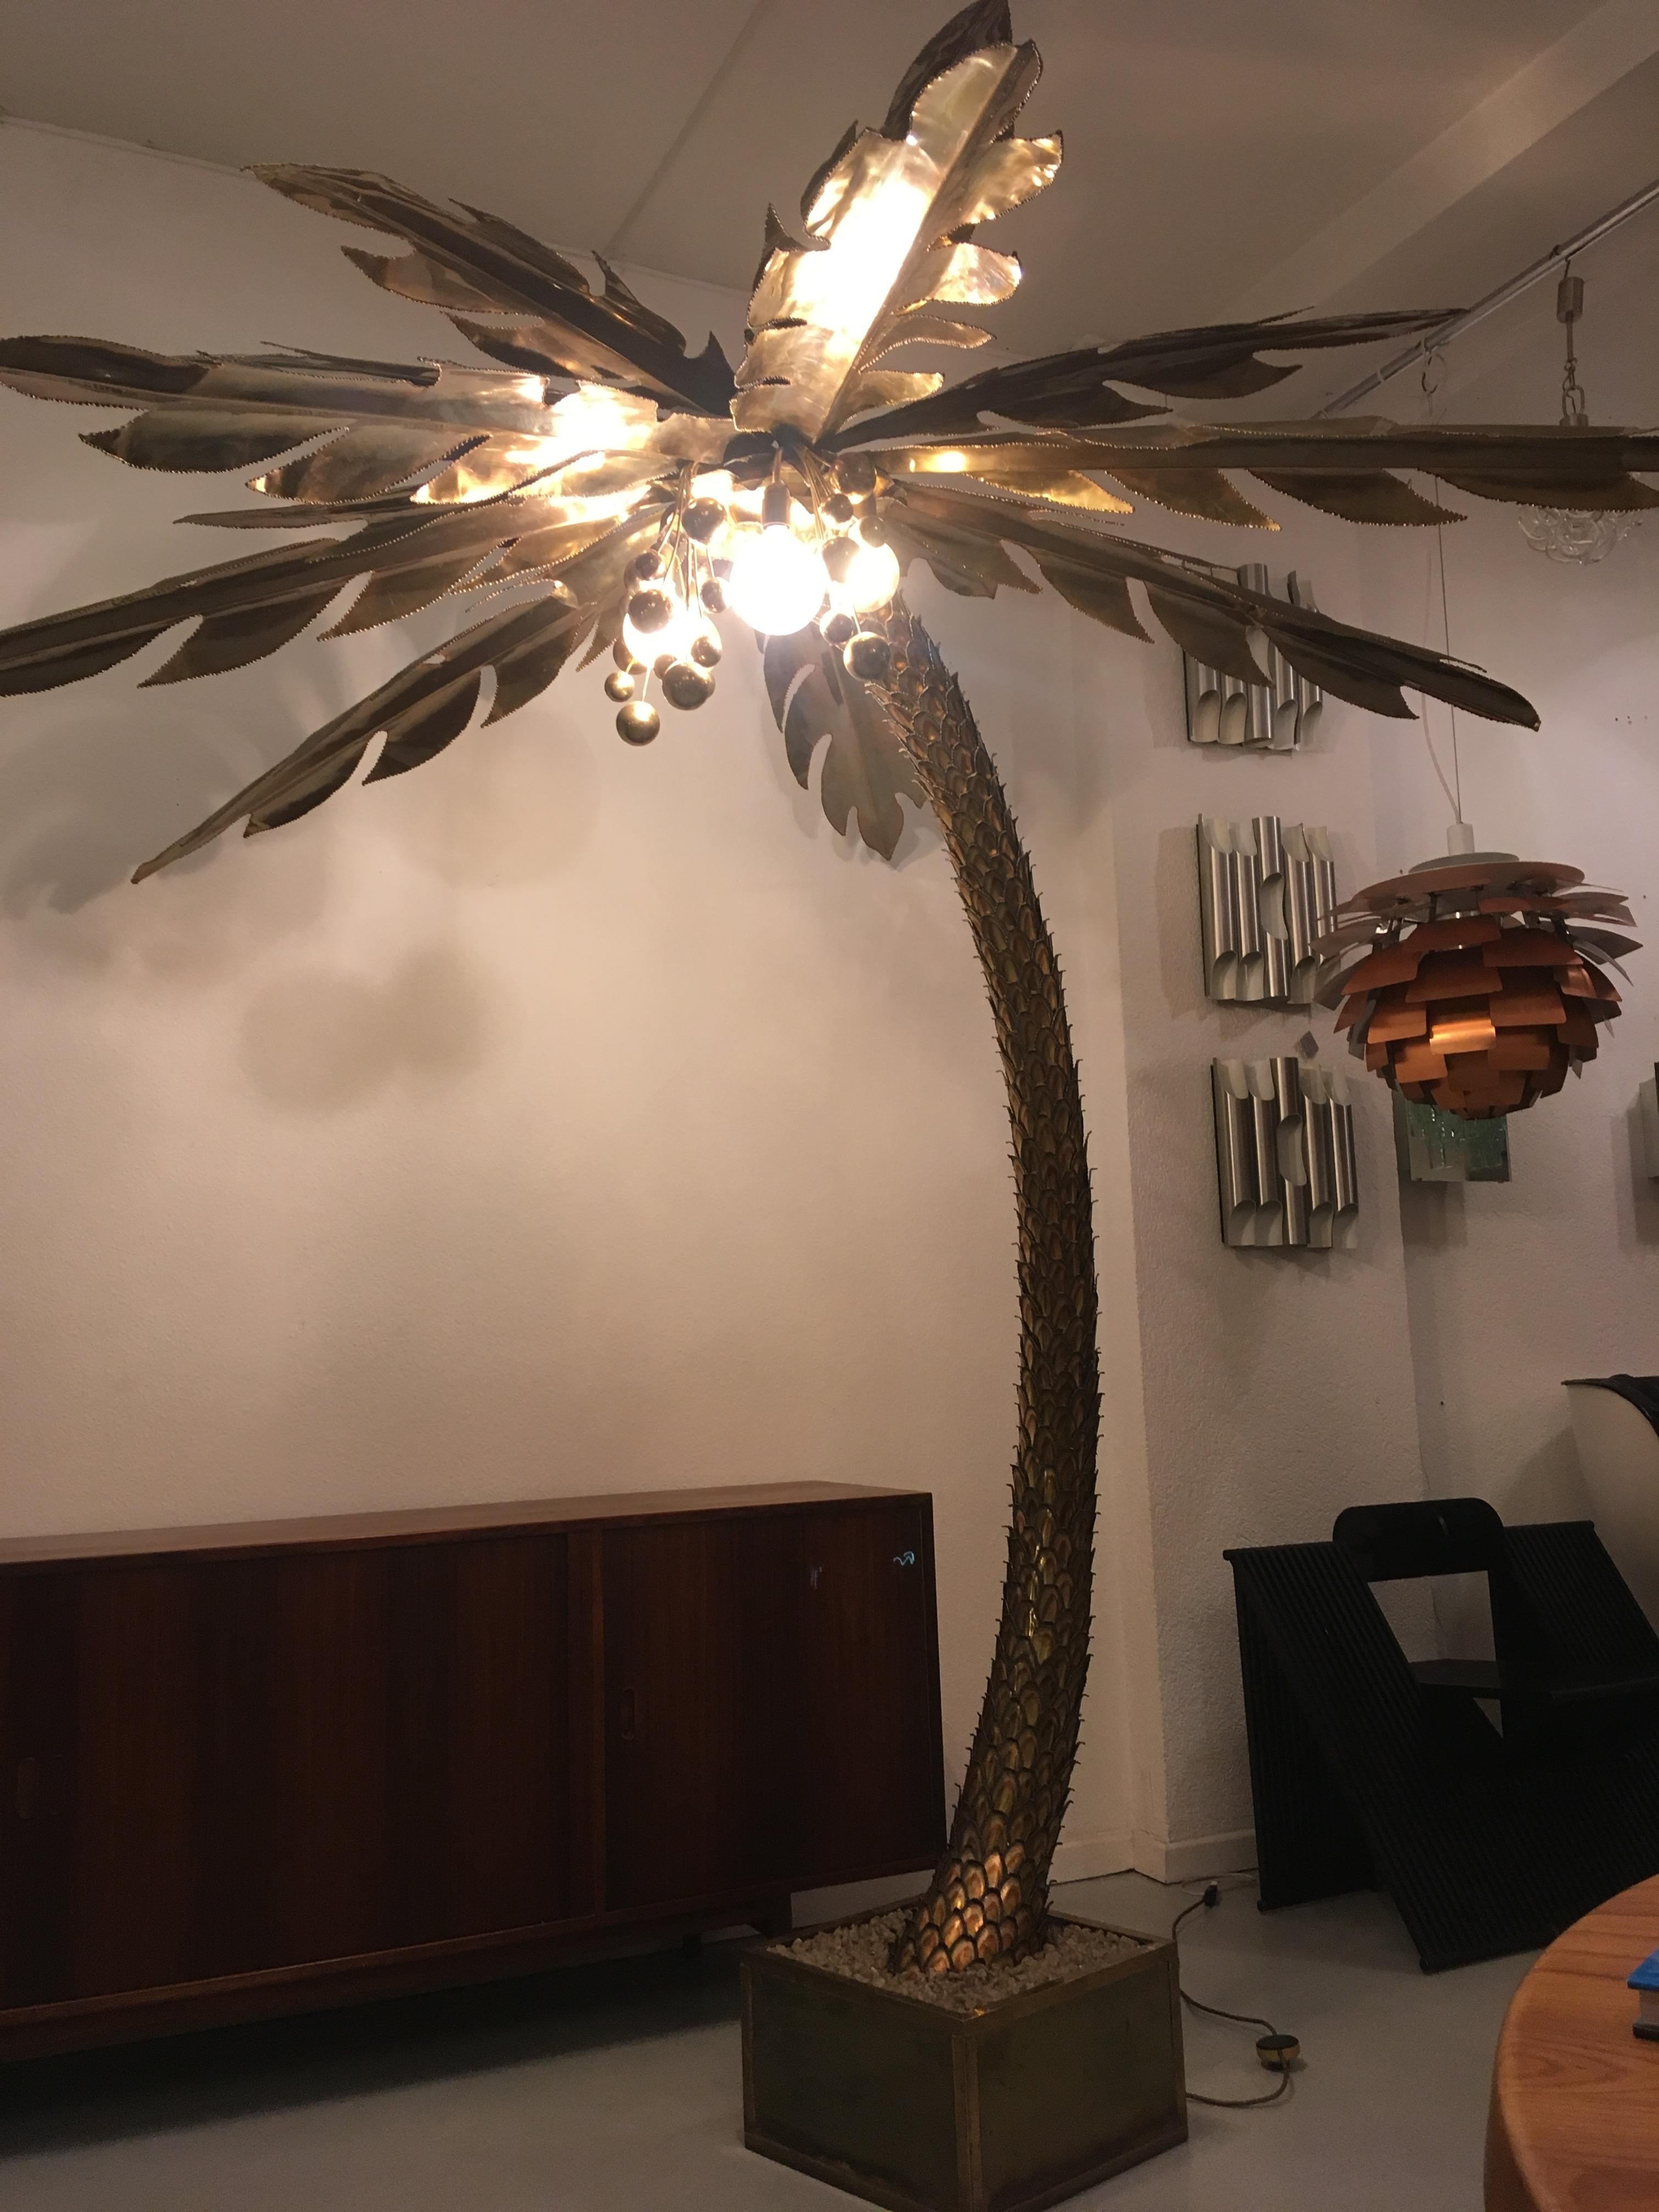 Huge brass palm tree floor lamp by Maison Jansen, France, circa 1970s.

Every leaf is dismountable for shipping

Good condition.